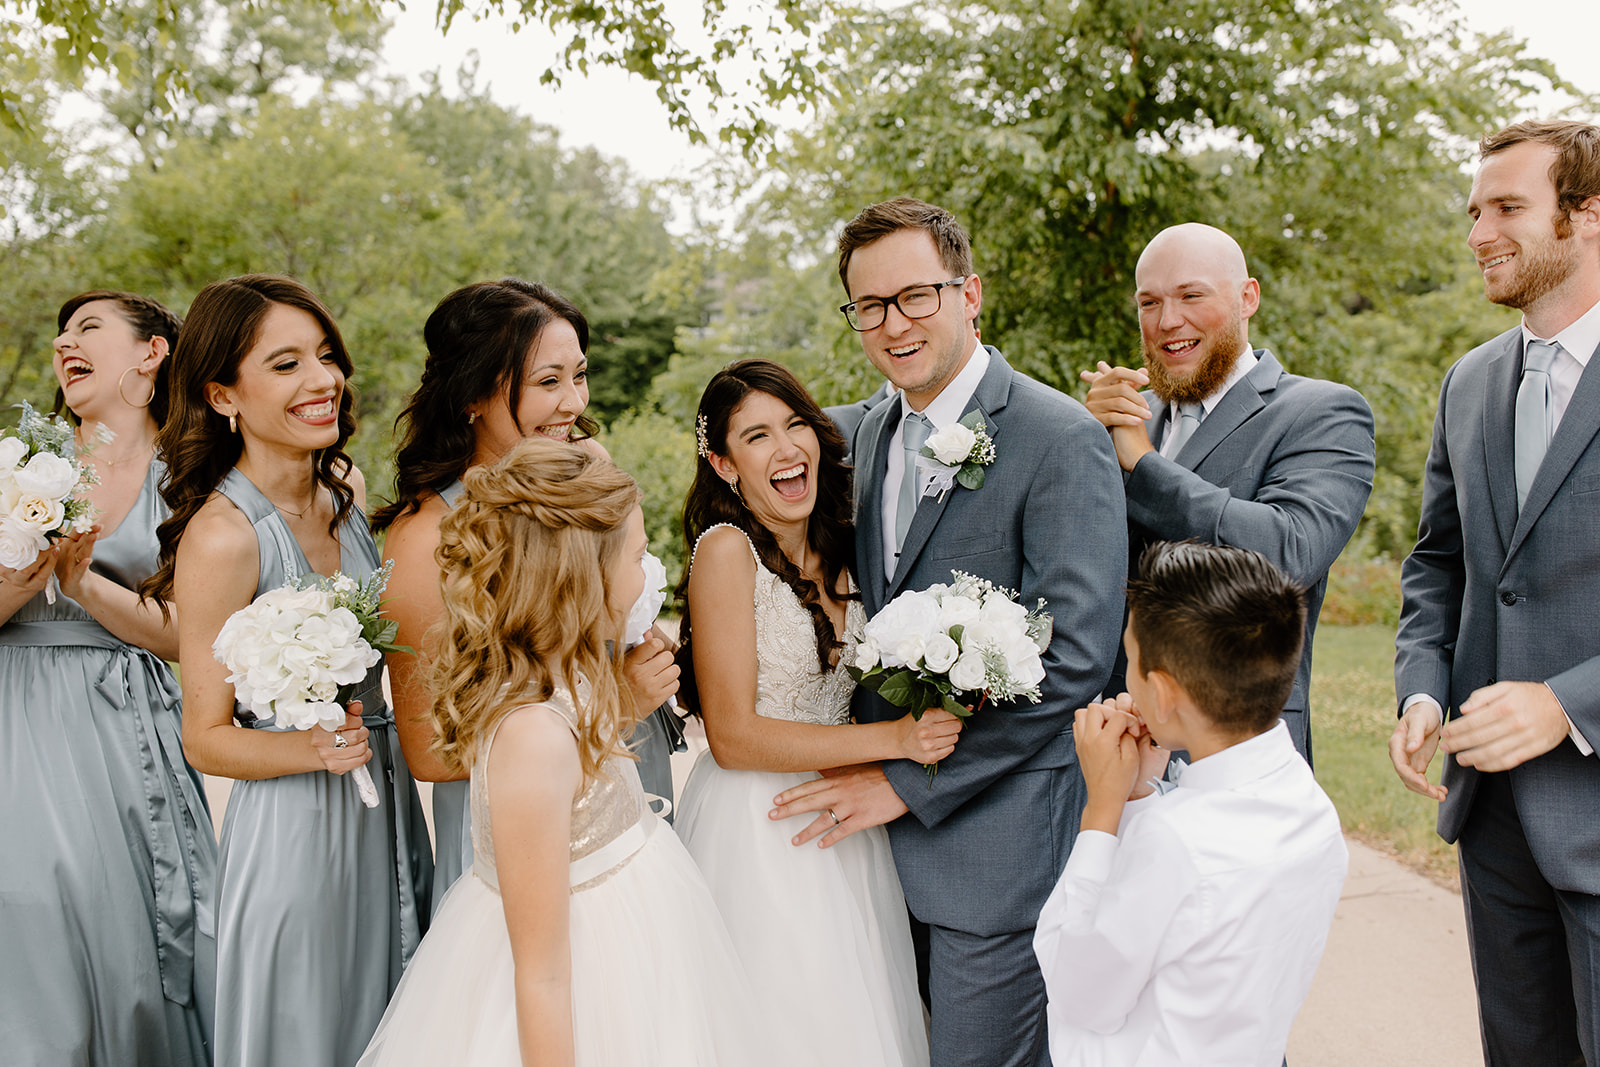 Bride and groom laugh surrounded by their wedding party